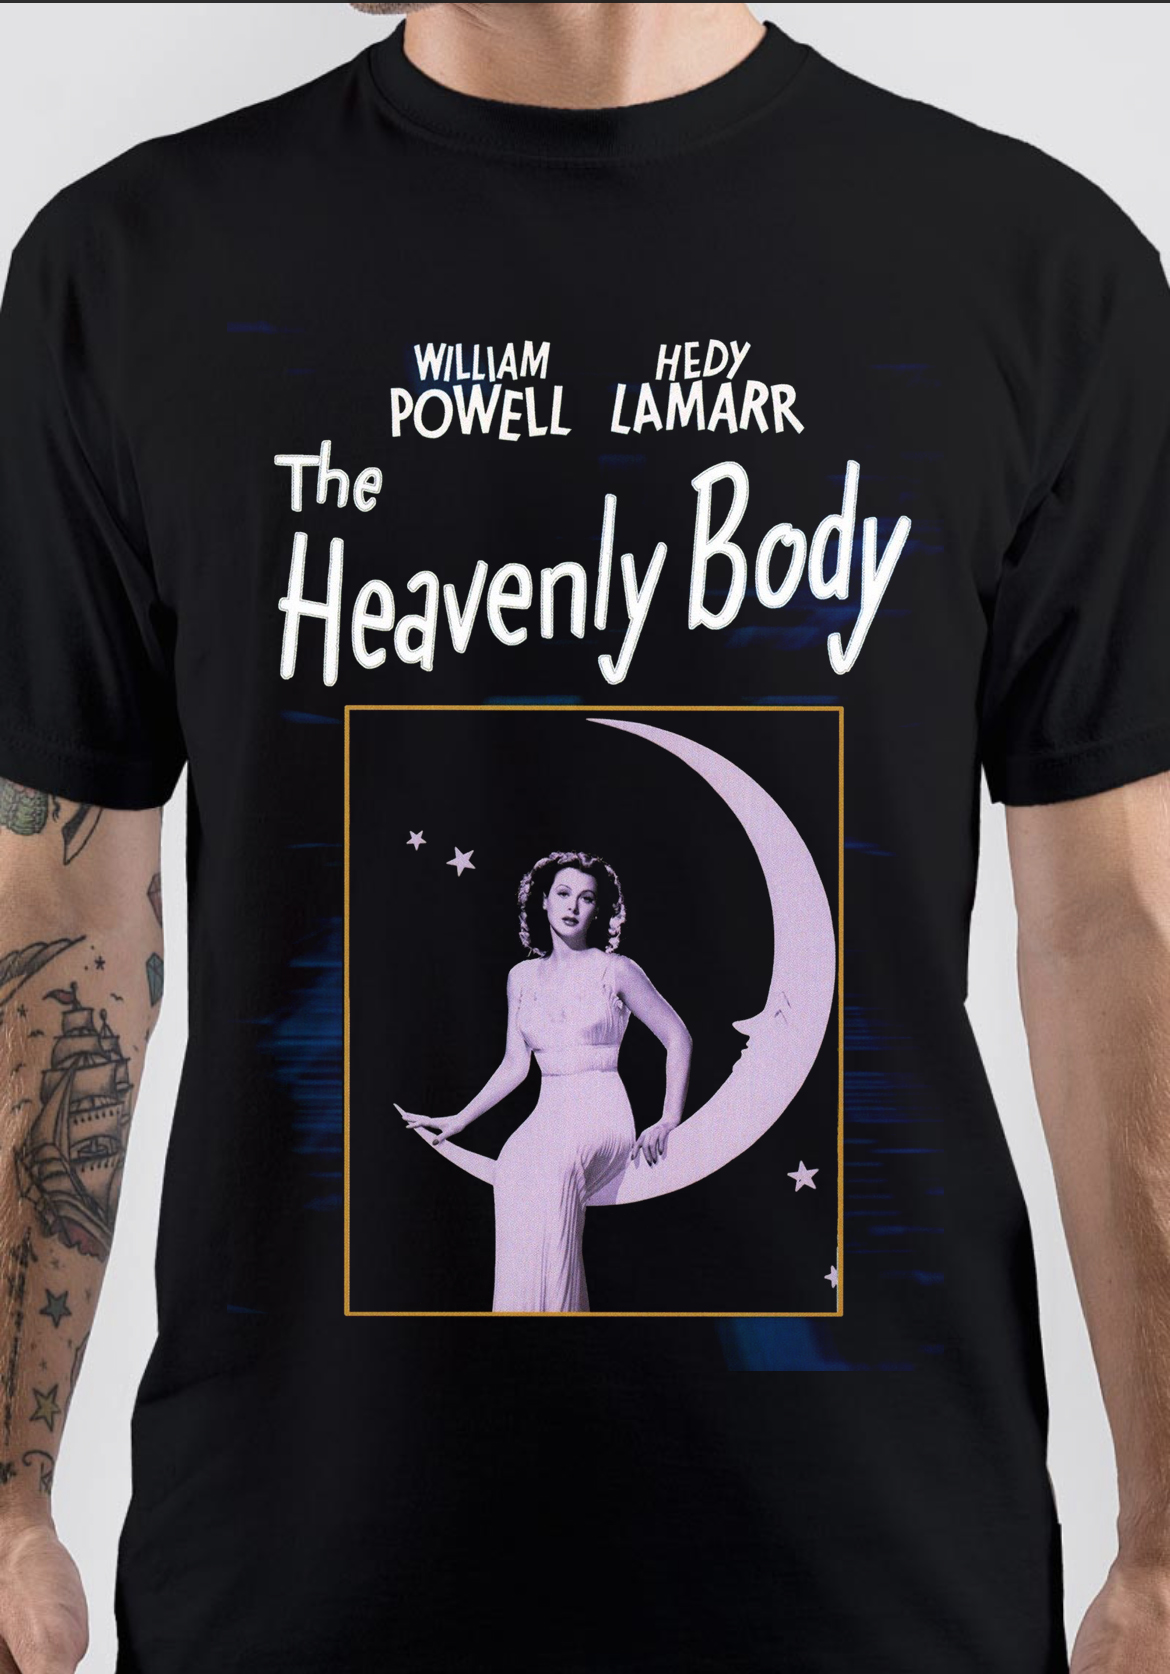 Hedy Lamarr T-Shirt And Merchandise